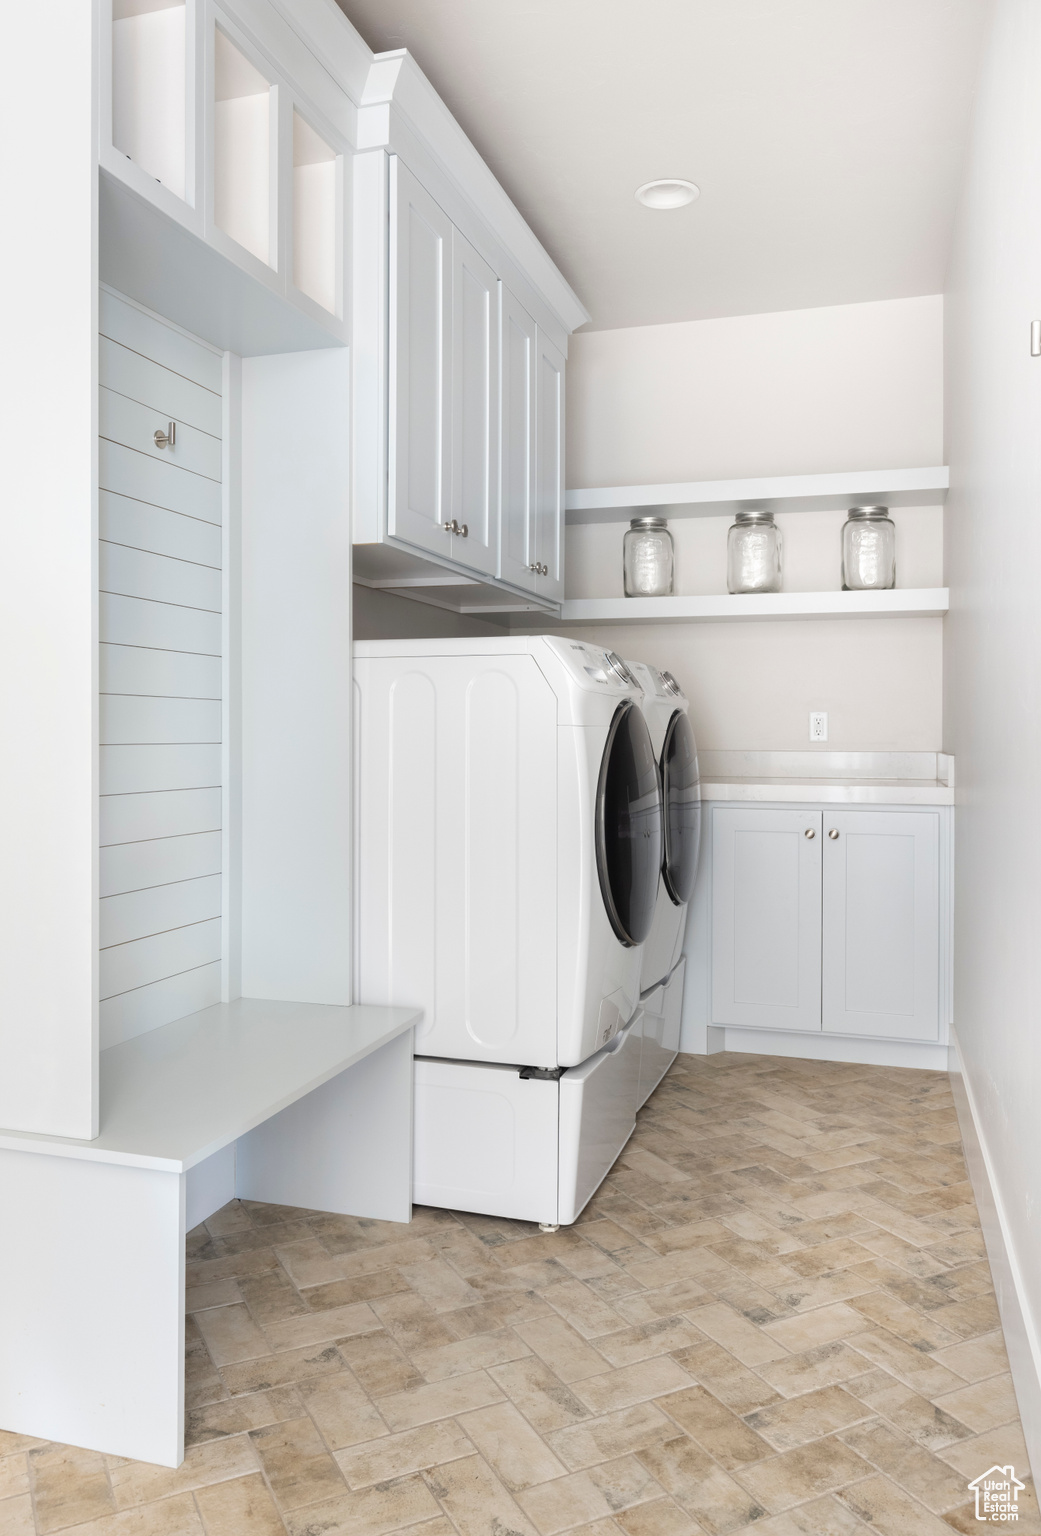 Laundry area featuring washing machine and clothes dryer and cabinets